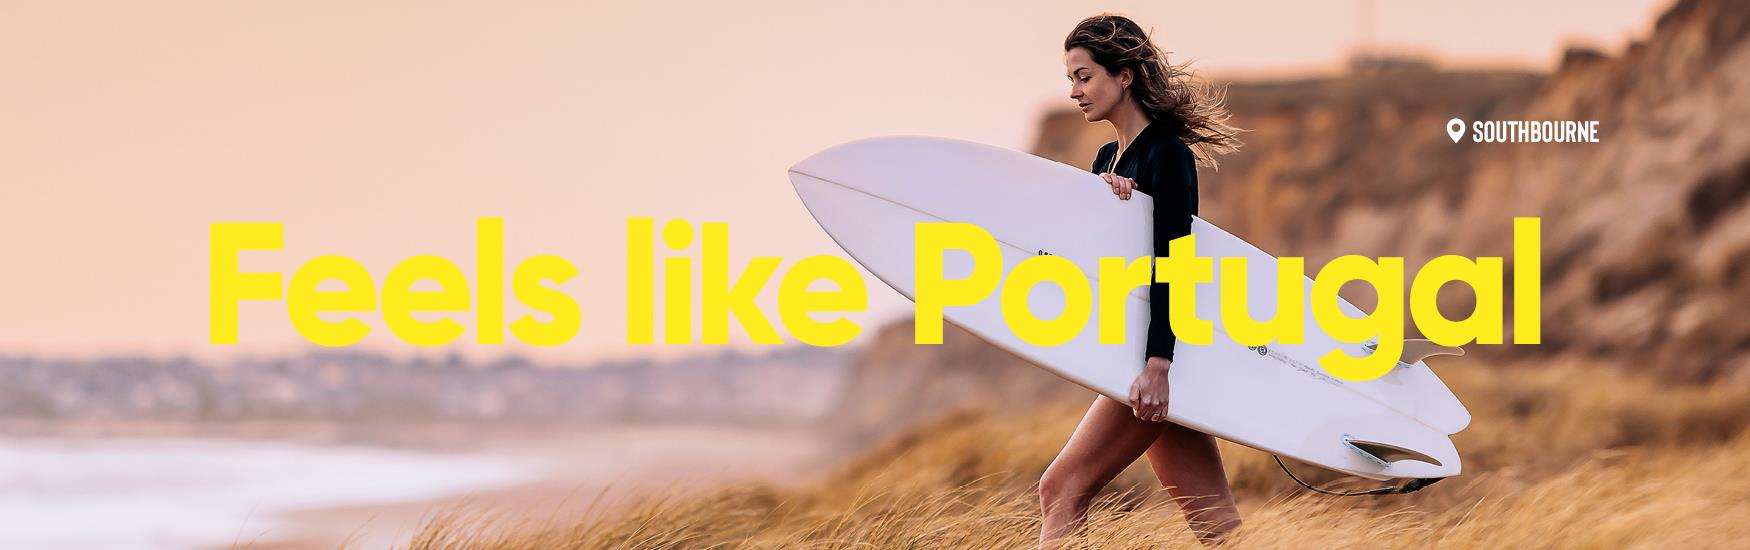 Woman walks with her surf board amogst the sand and grass towards the sea, text overlay reads "feels like Portugal"